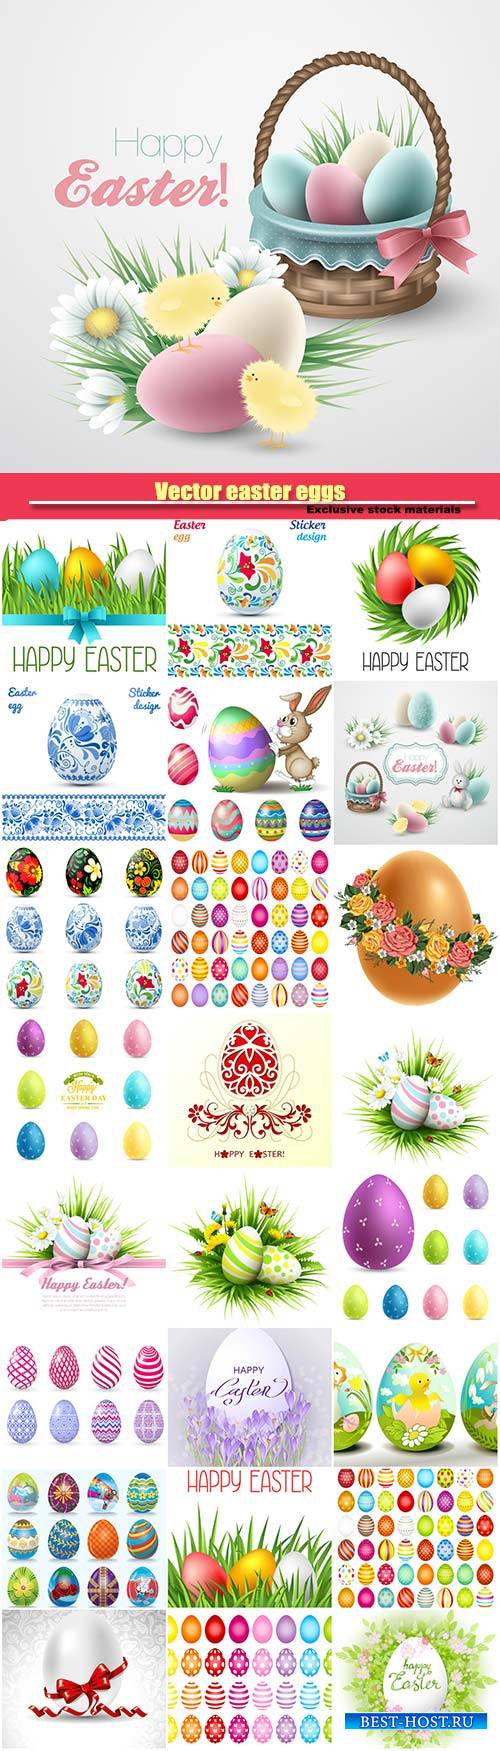 Vector easter eggs, happy easter holiday vector backgrounds